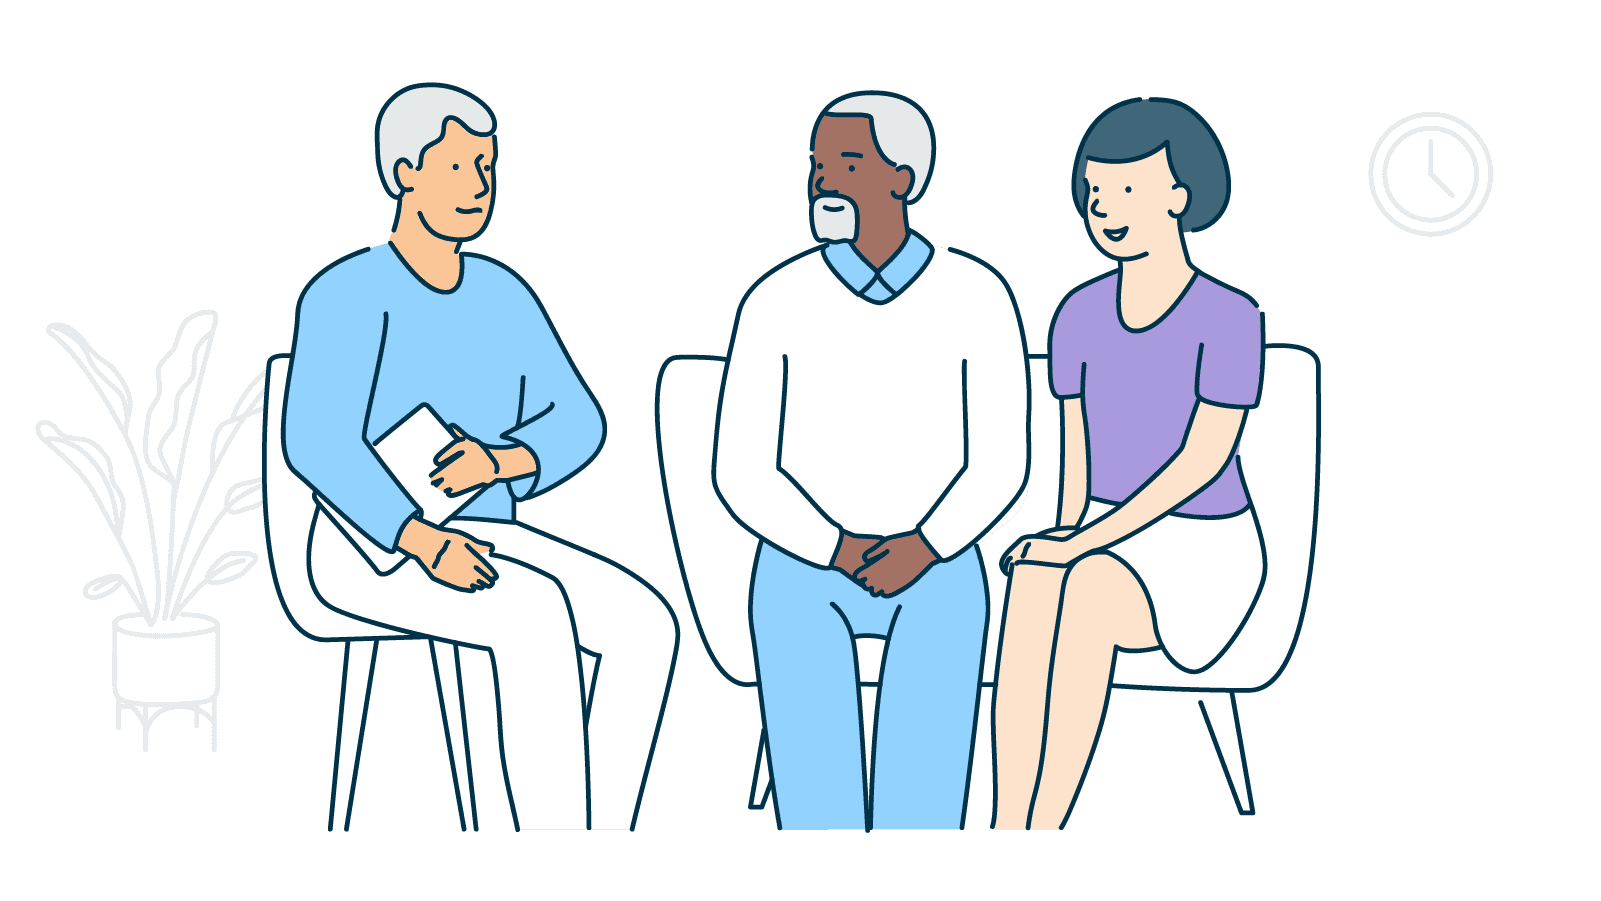 An illustration showing a couple sitting talking to a person holding some papers